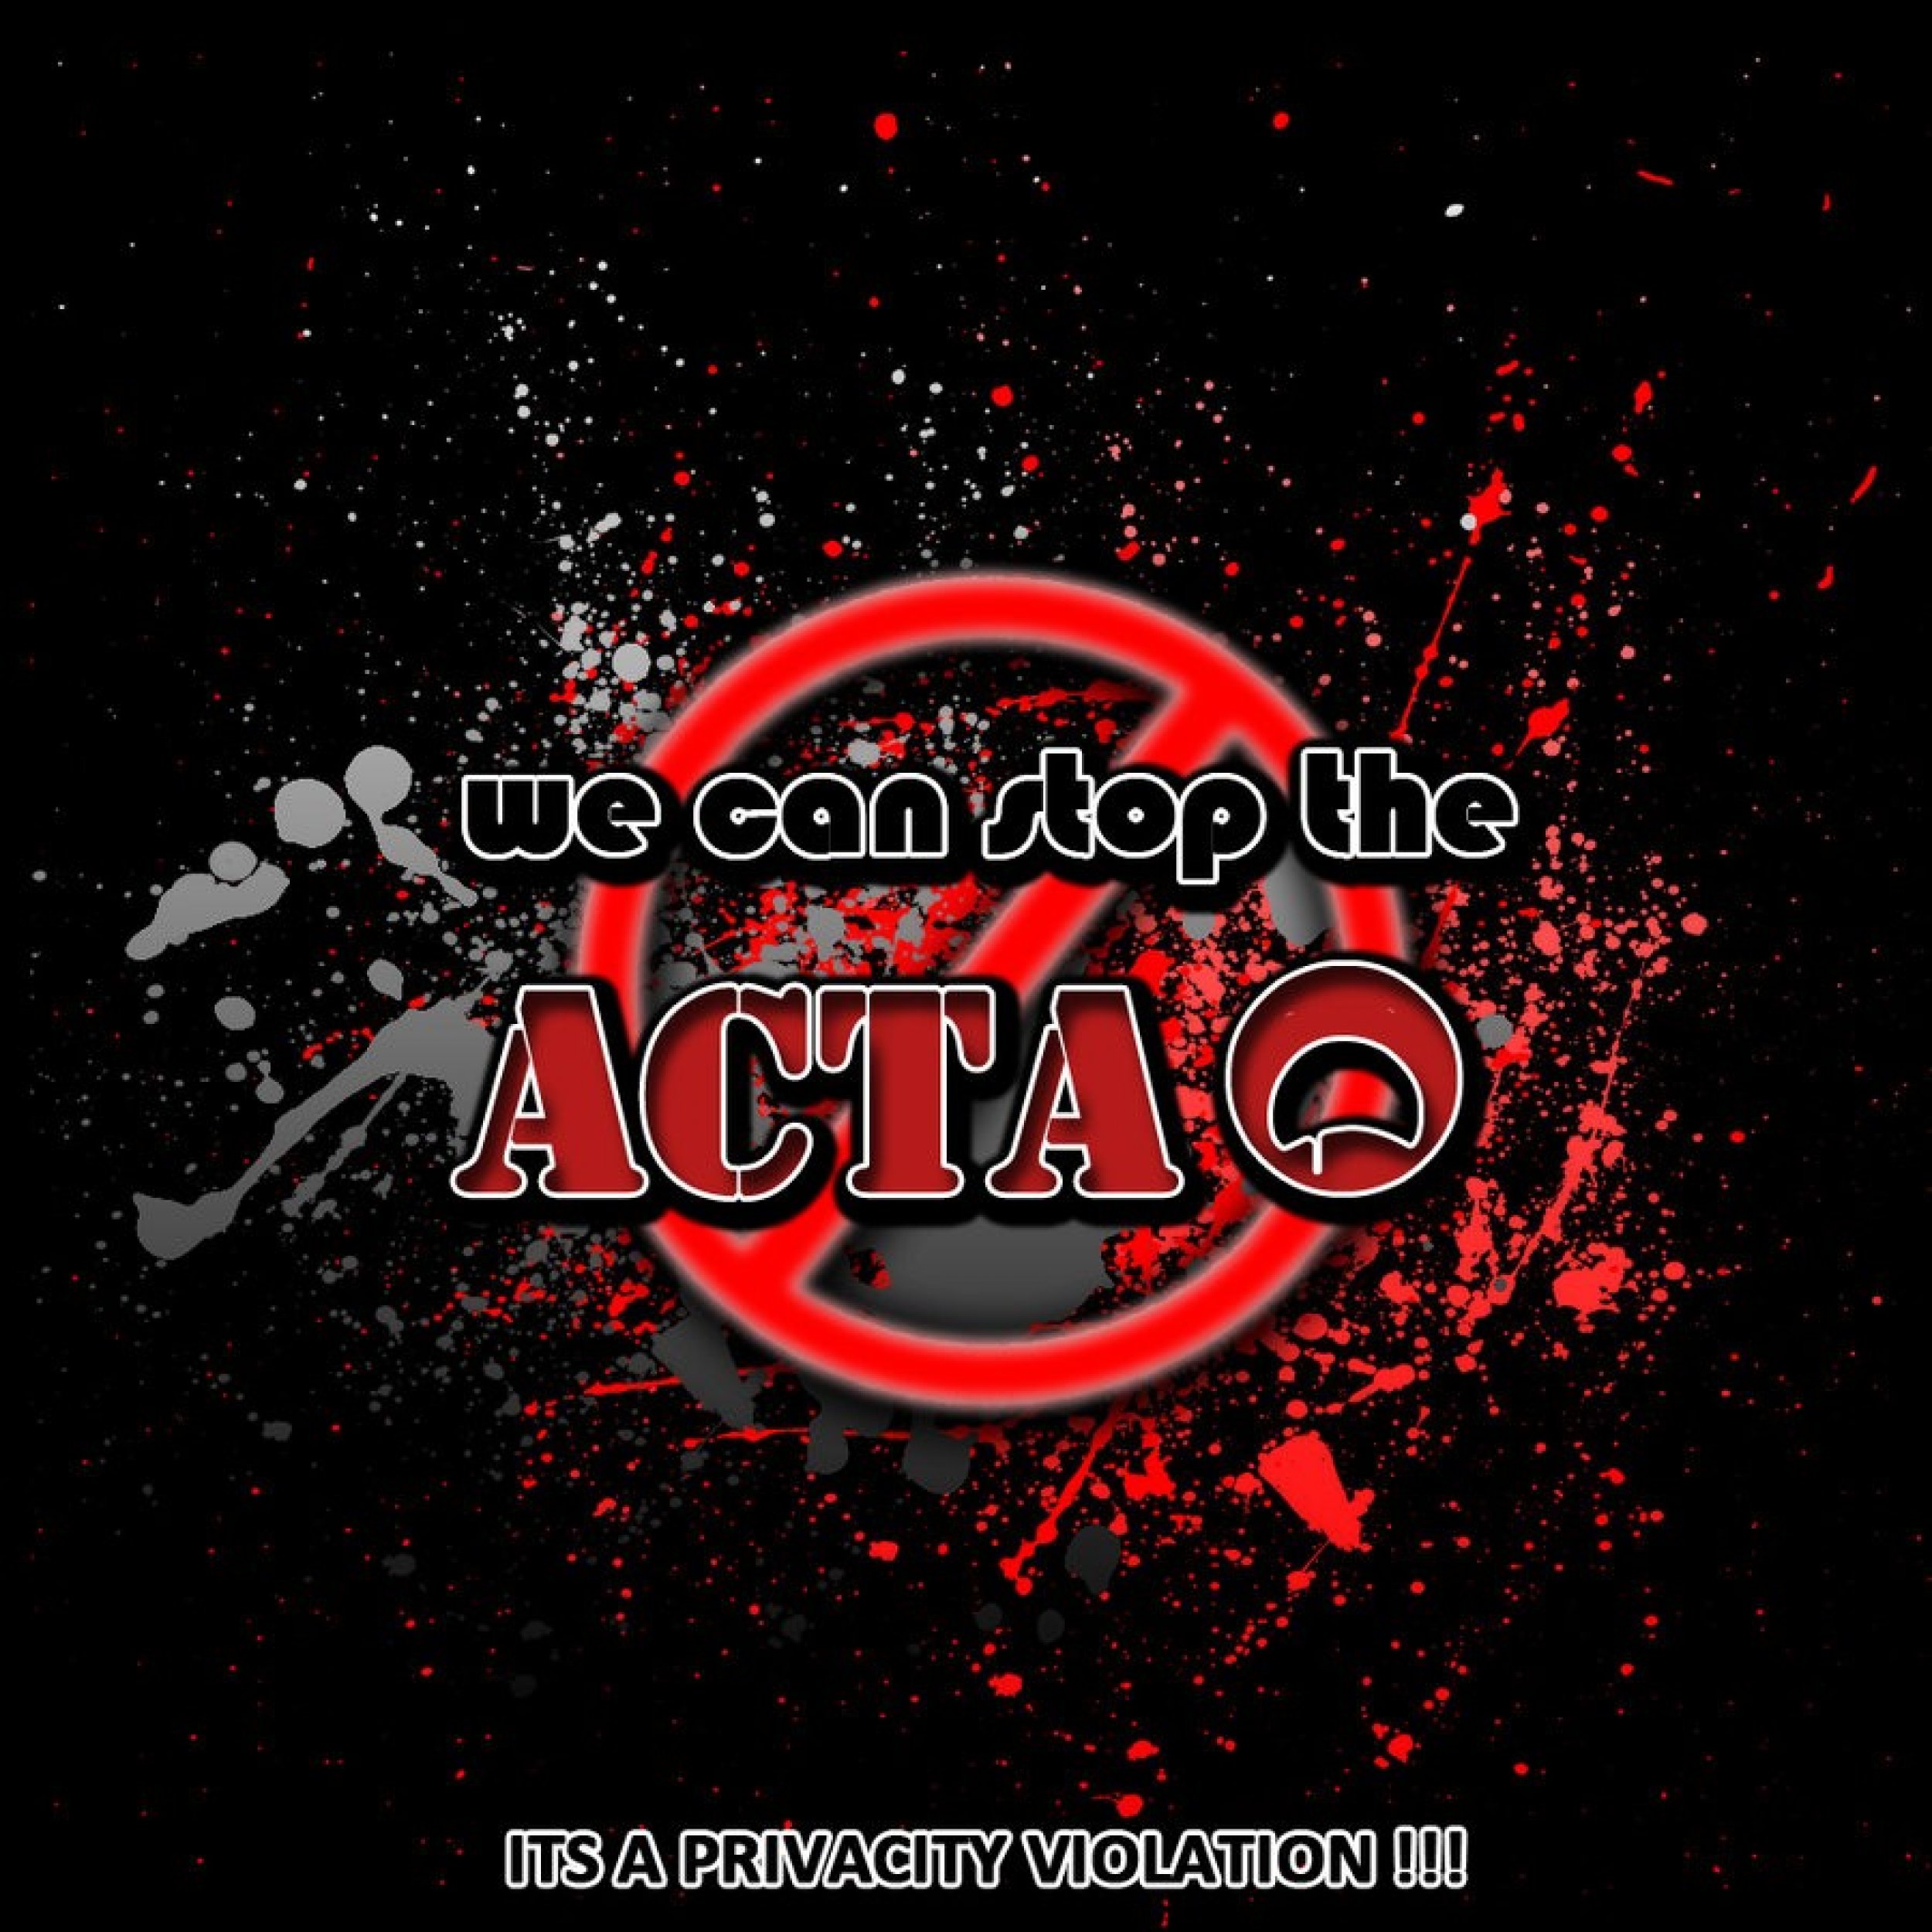 We Can Stop The ACTA